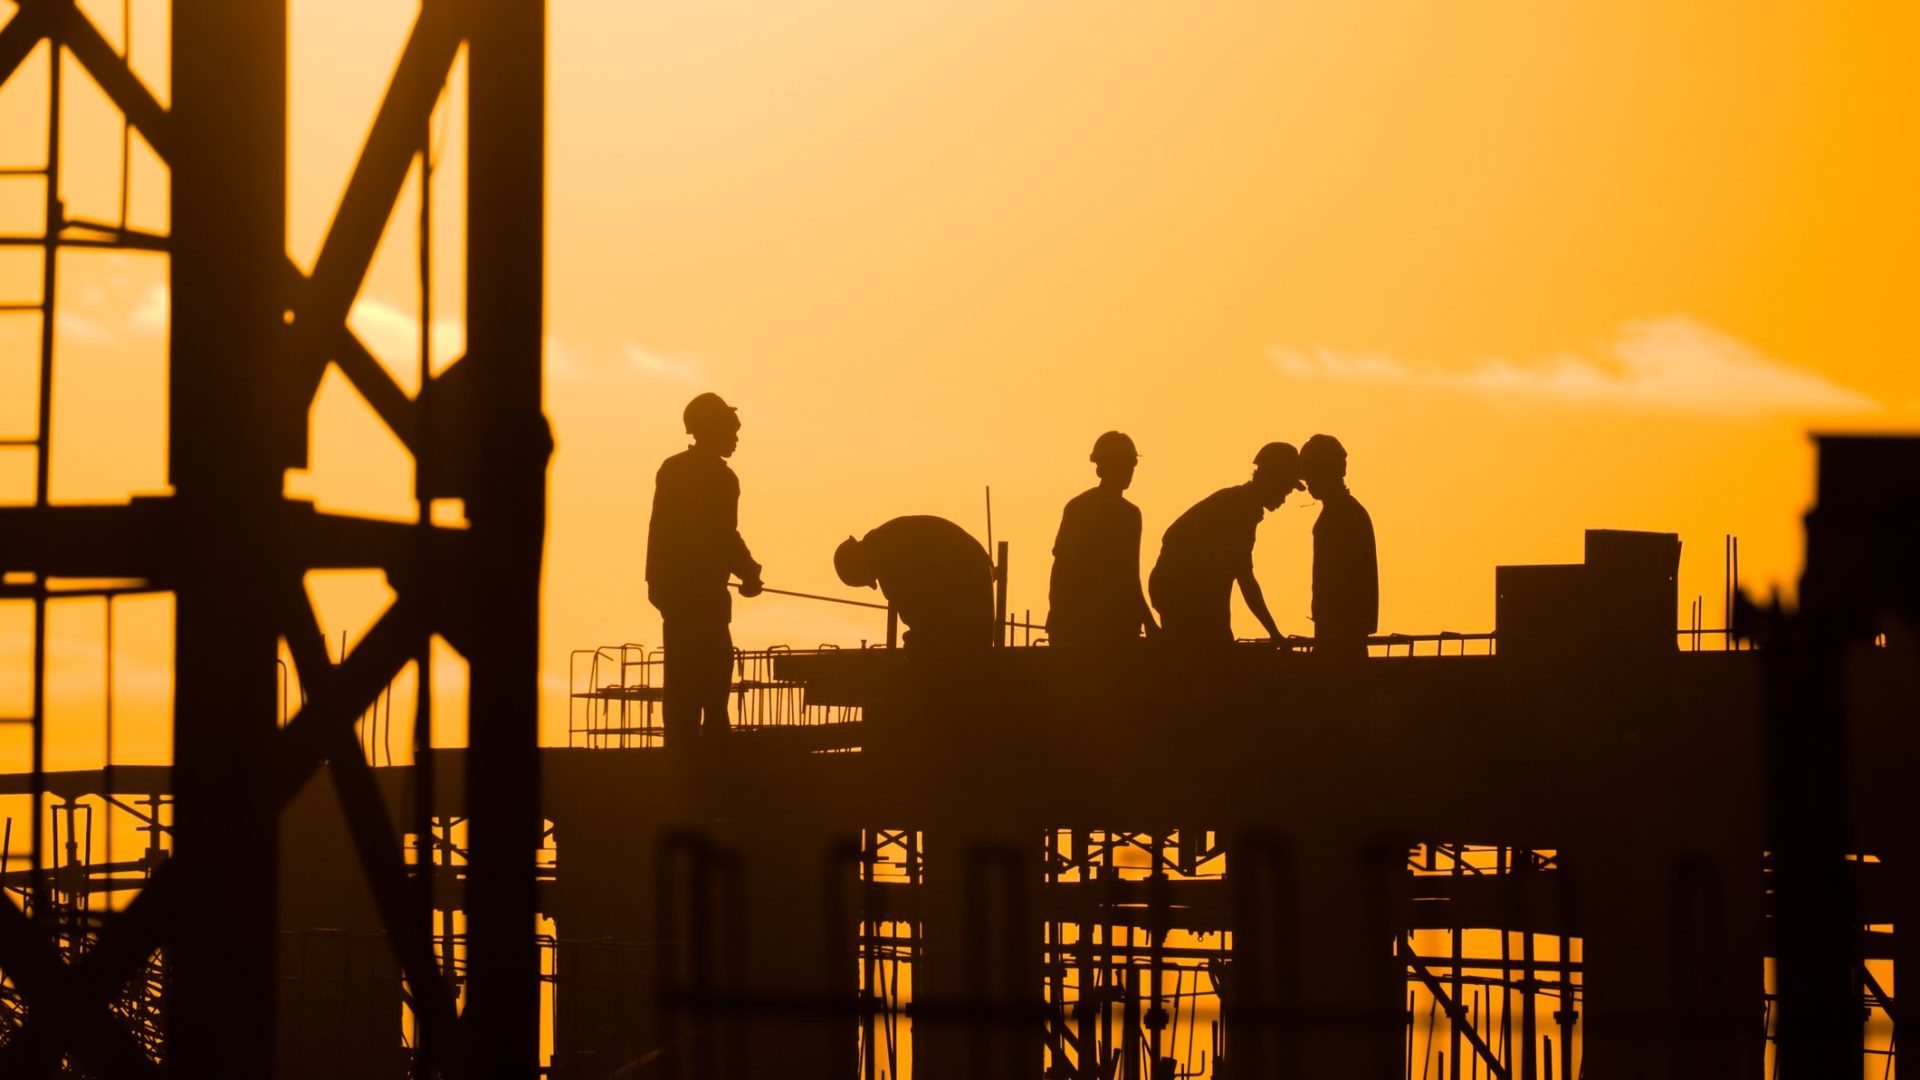 Construction site workers at sunset